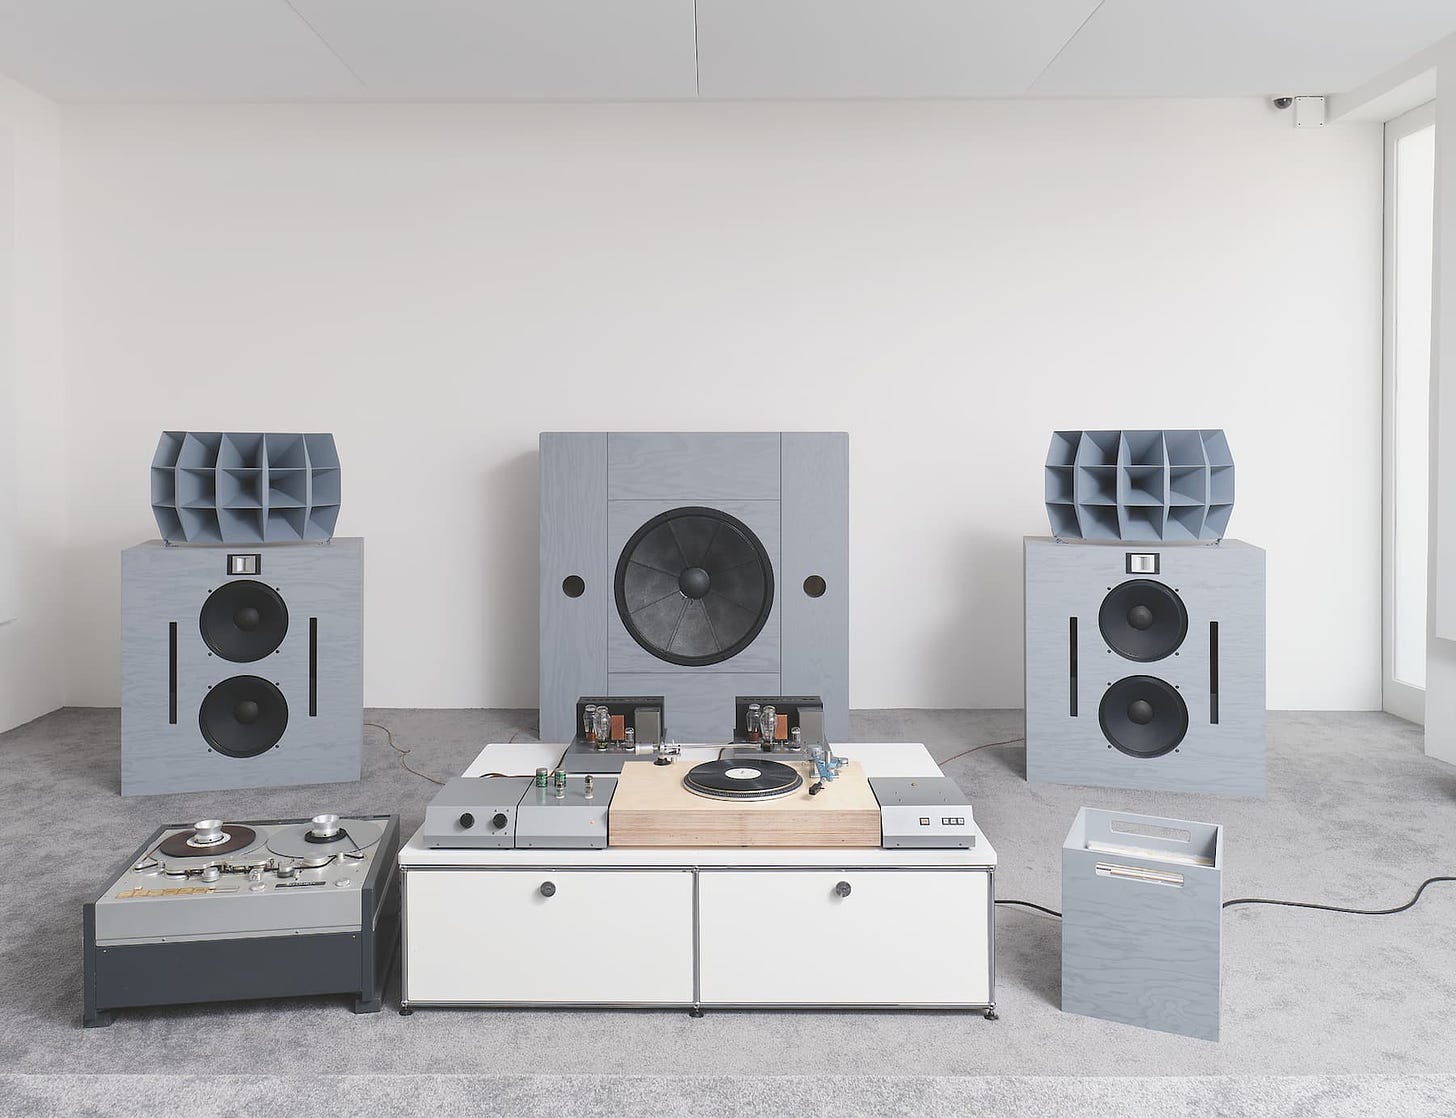 Photograph of a custom-built sound system made with grey materials situated within a white room with grey carpet